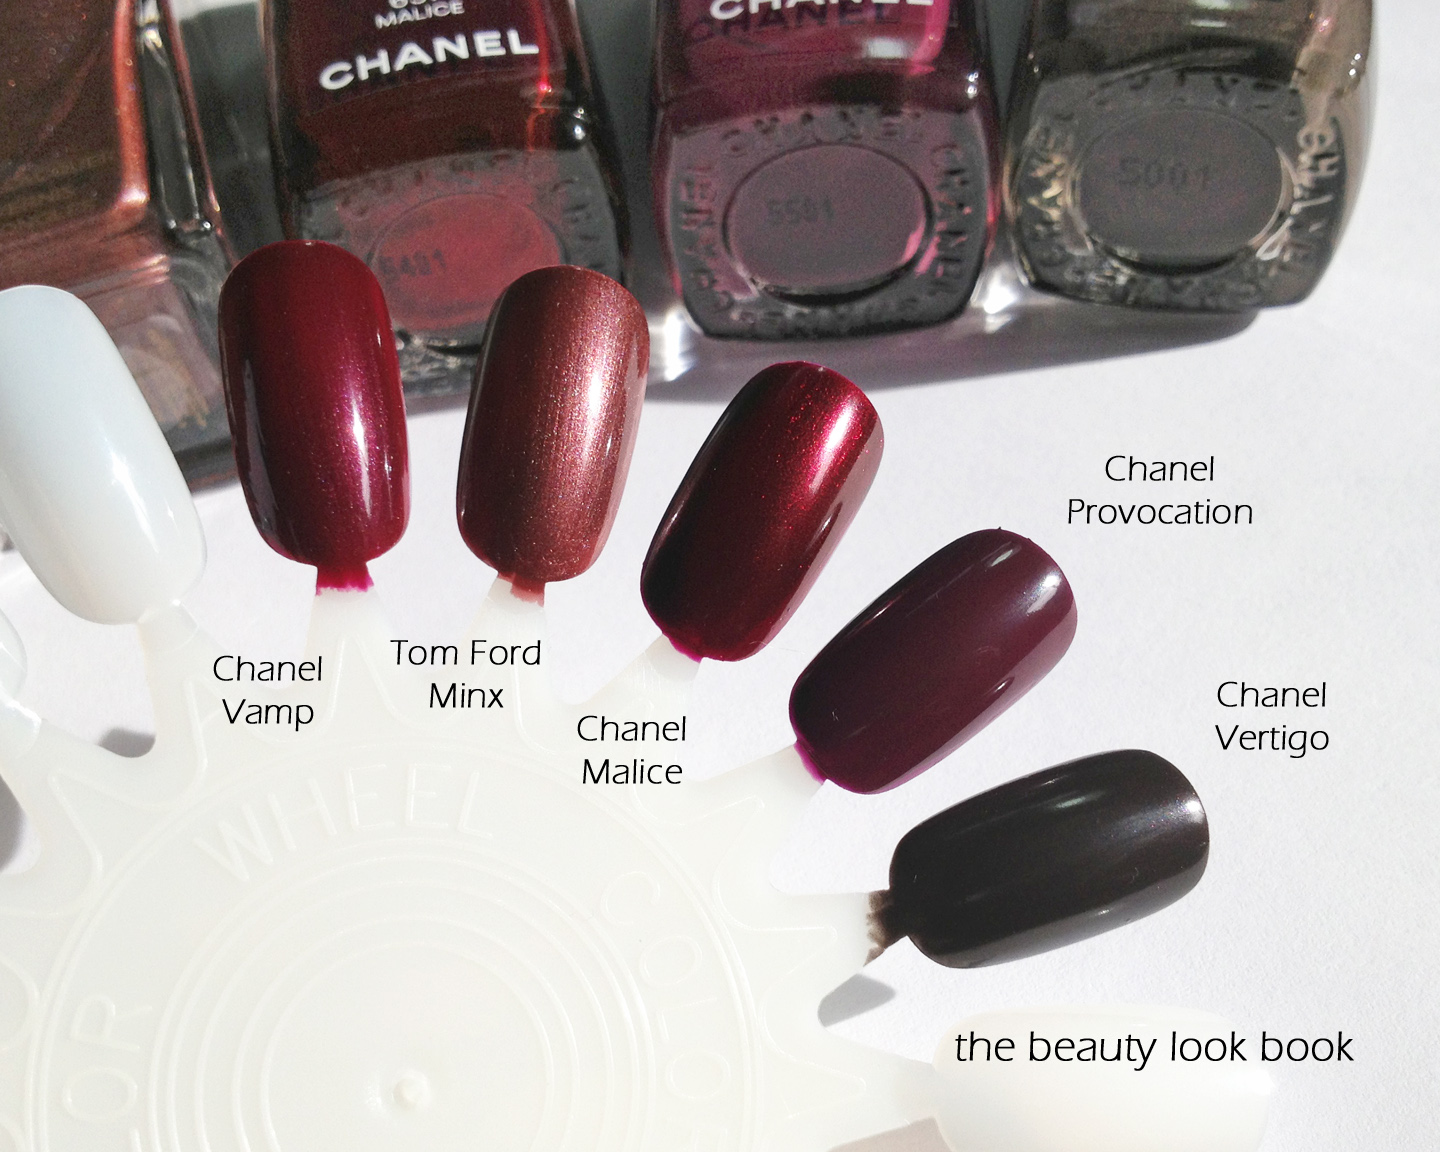 Rescue Beauty Lounge Archives - Page 4 of 6 - The Beauty Look Book